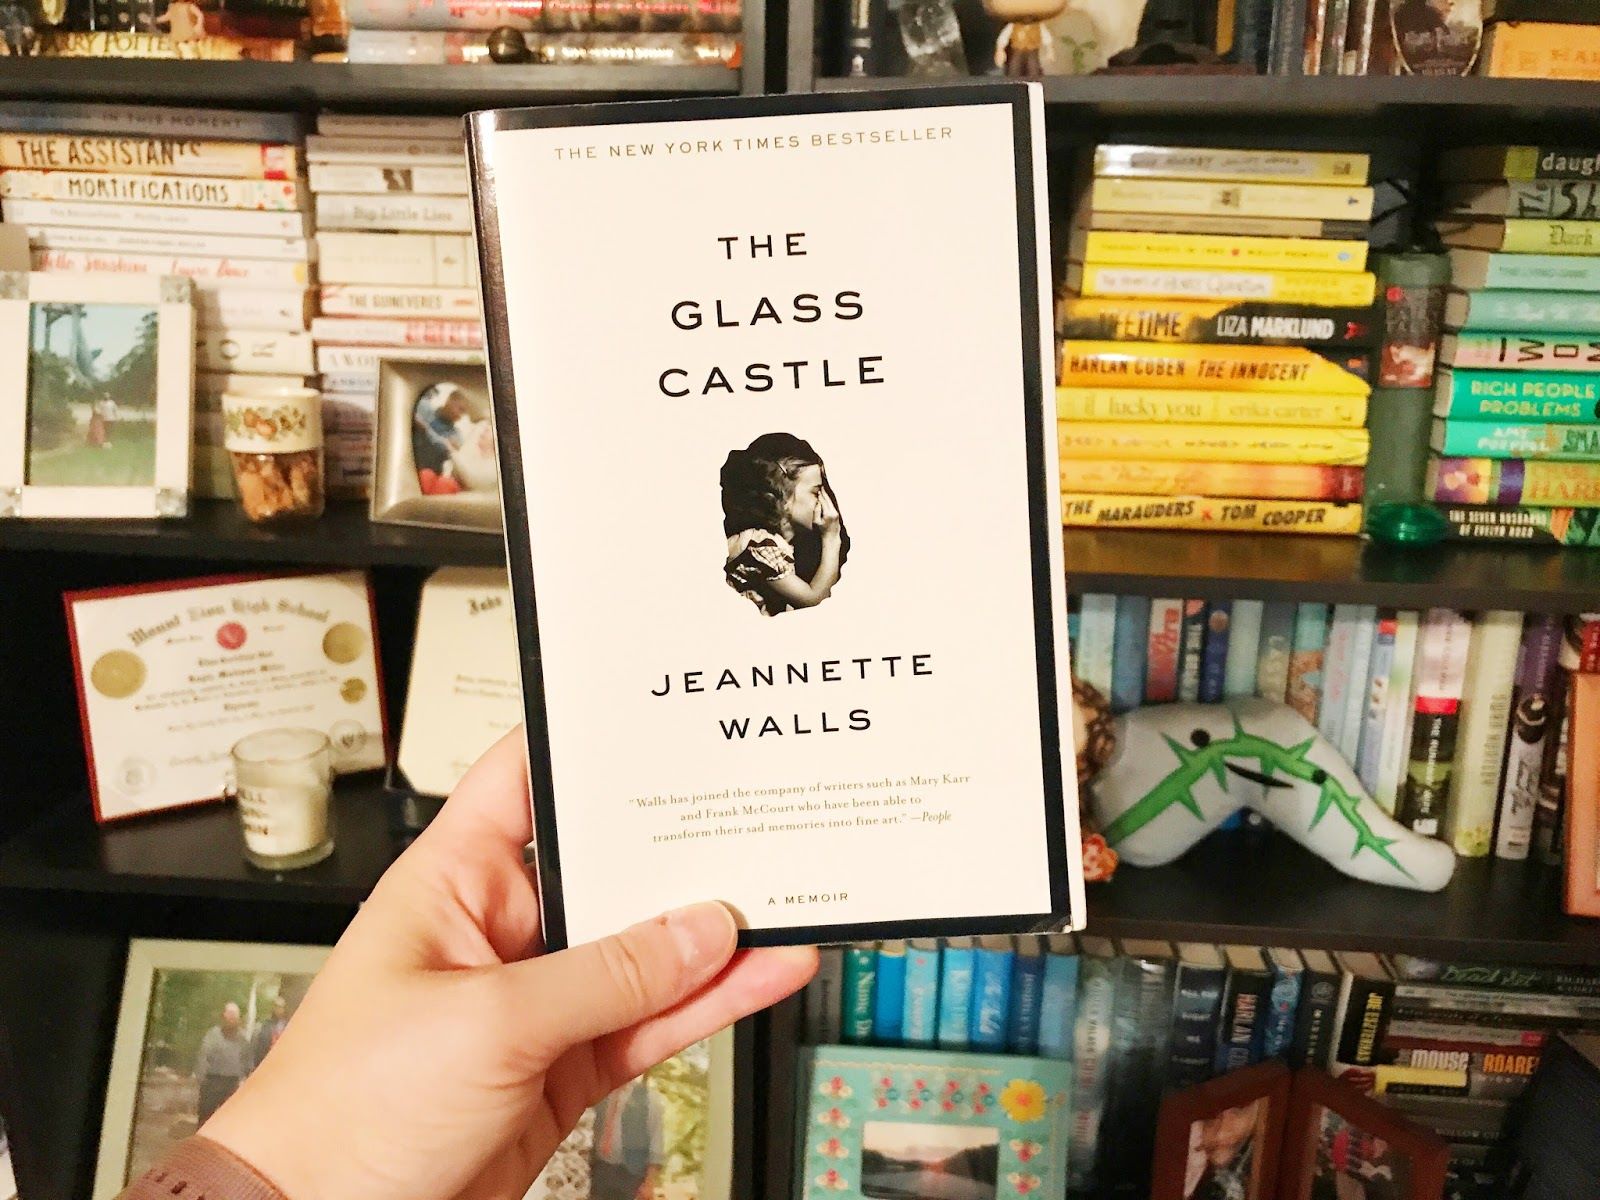 11-extraordinary-facts-about-the-glass-castle-by-jeannette-walls